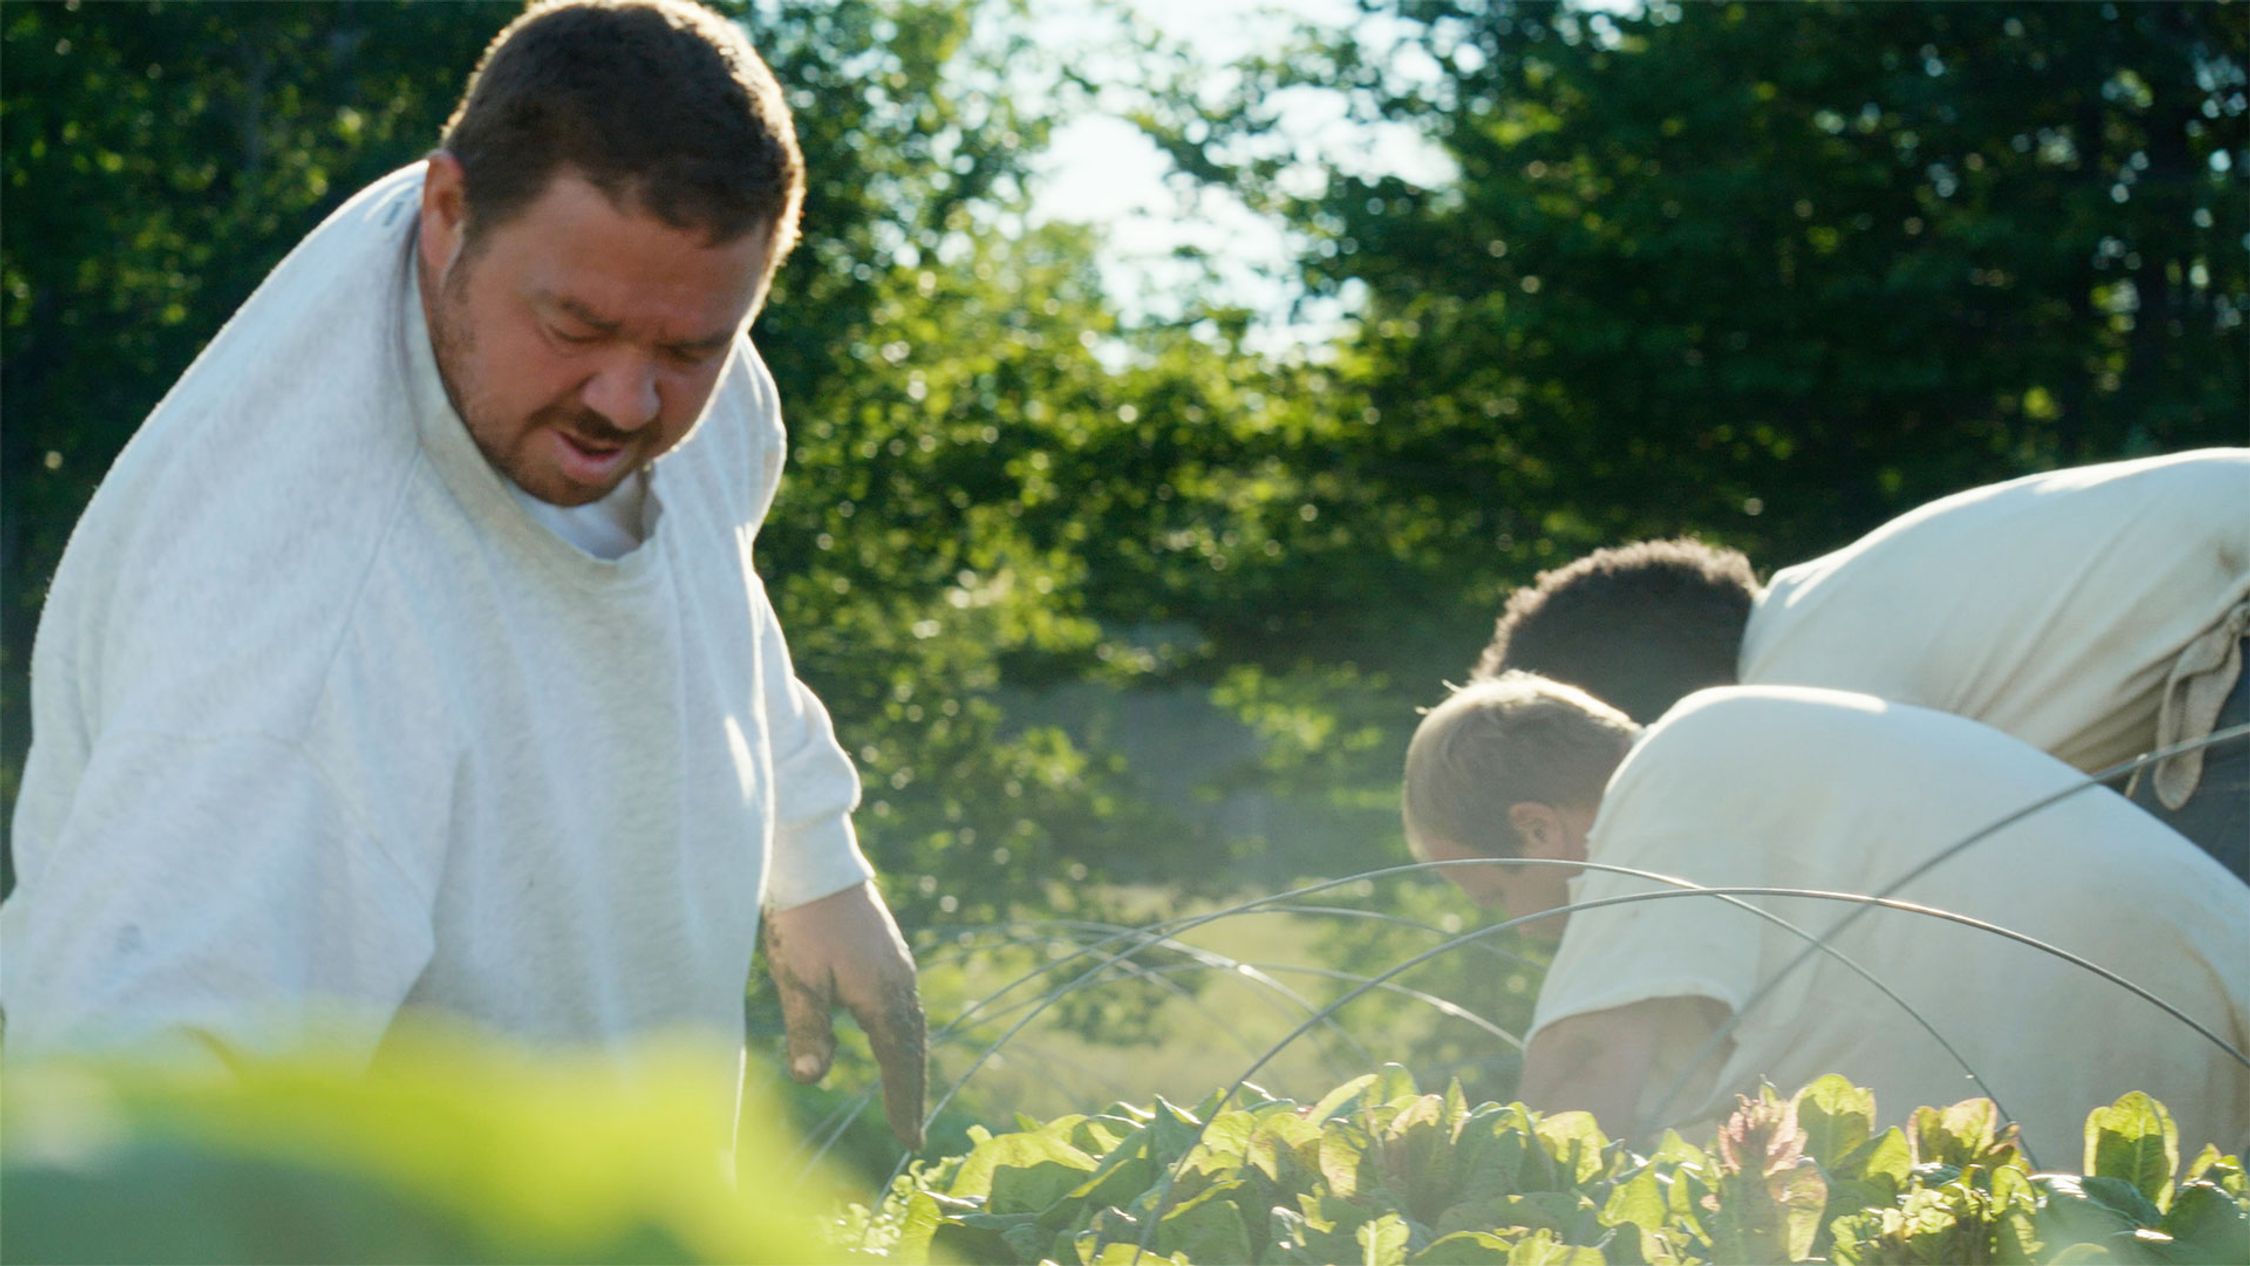 Three people are working in a garden during what appears to be the early morning, given the soft sunlight. They are all dressed in the same white garments while tending to the plants, which are in neat rows and supported by a wire structure. The lush greenery in the background suggests a fertile, well-maintained agricultural environment.